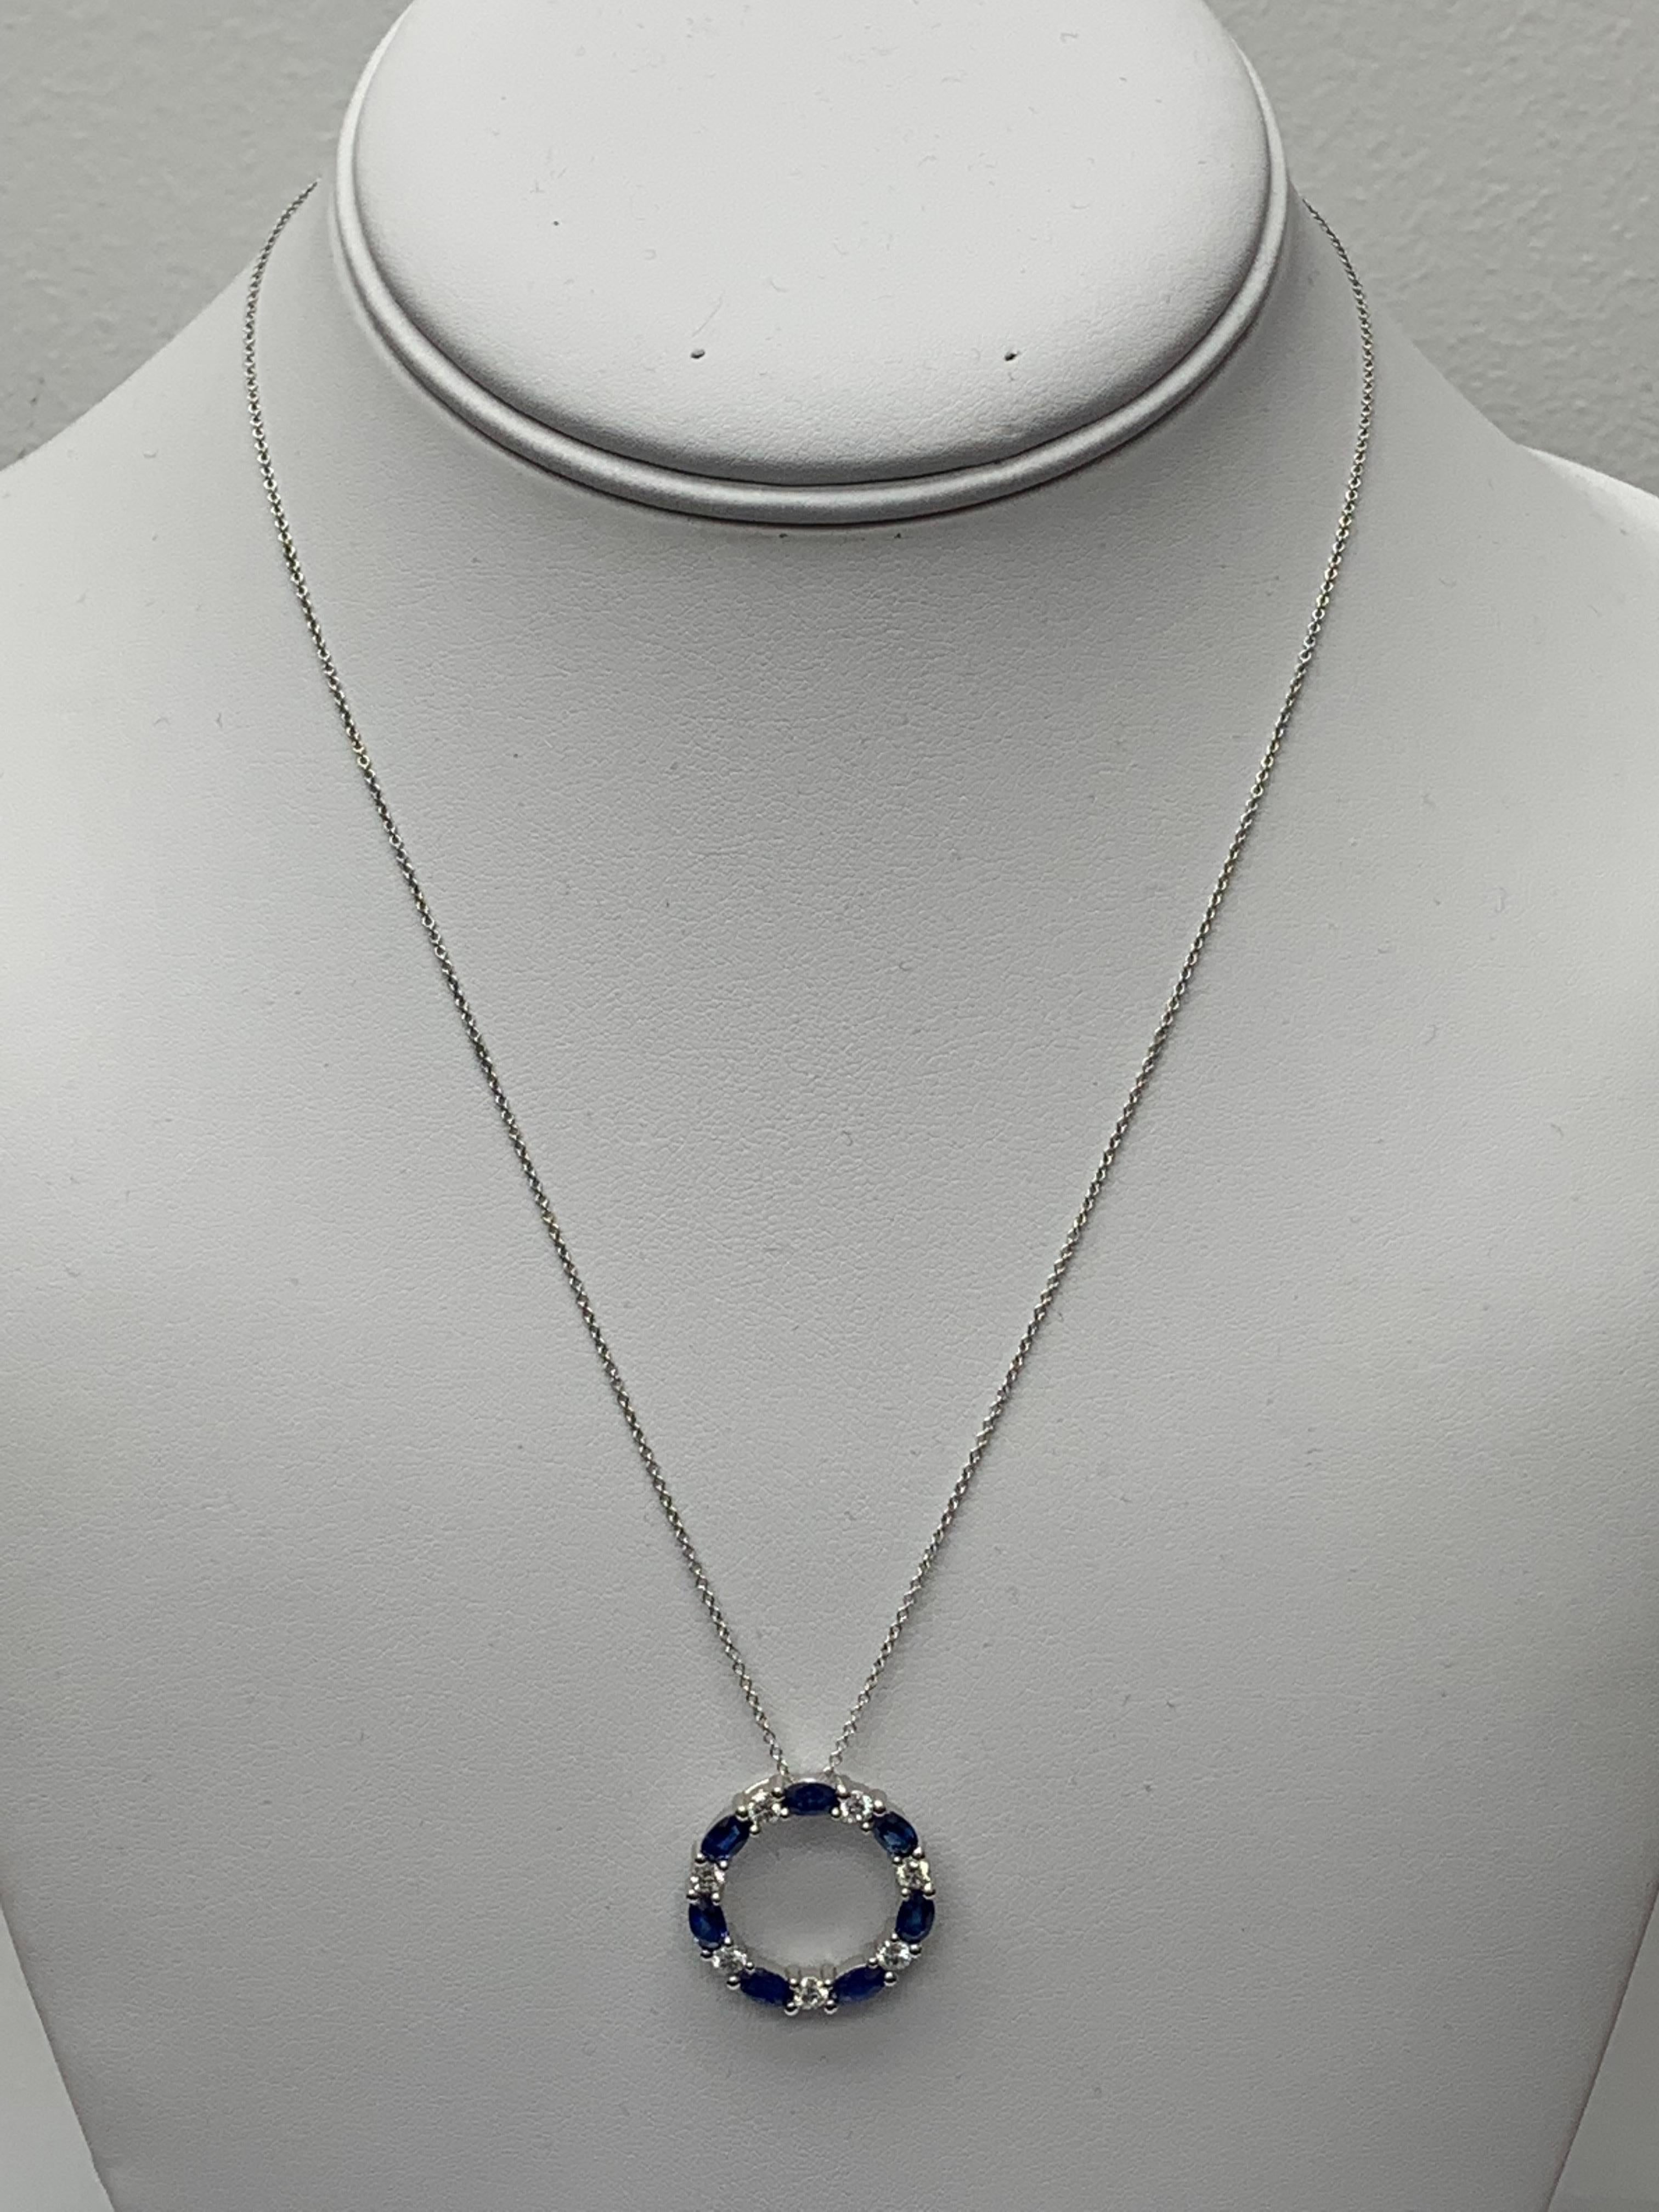 Mixed Cut 2.05 Carat Blue Sapphire and Diamond Circle Pendant Necklace in 14k White Gold For Sale